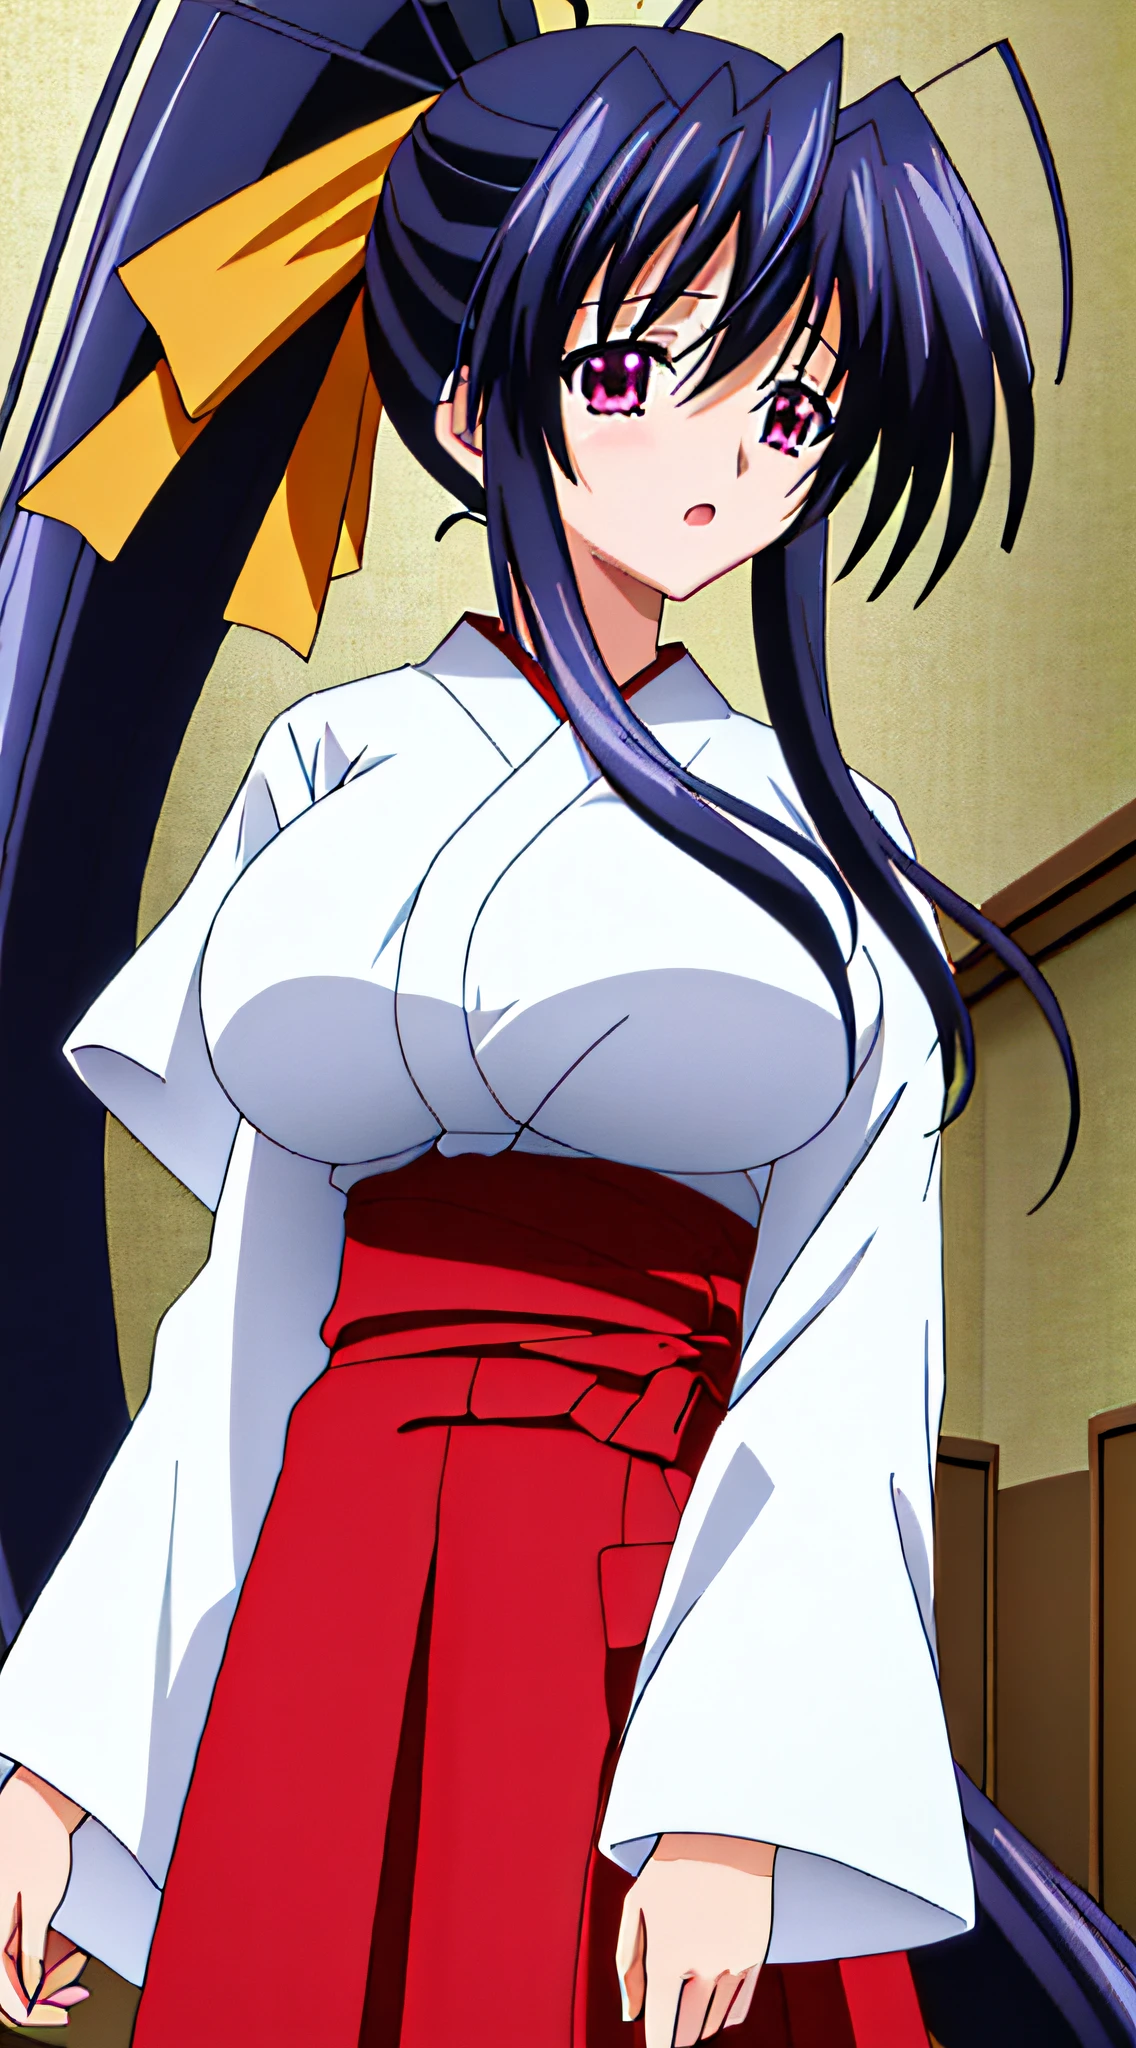 Anime girl with long black hair and white blouse standing in a room ...